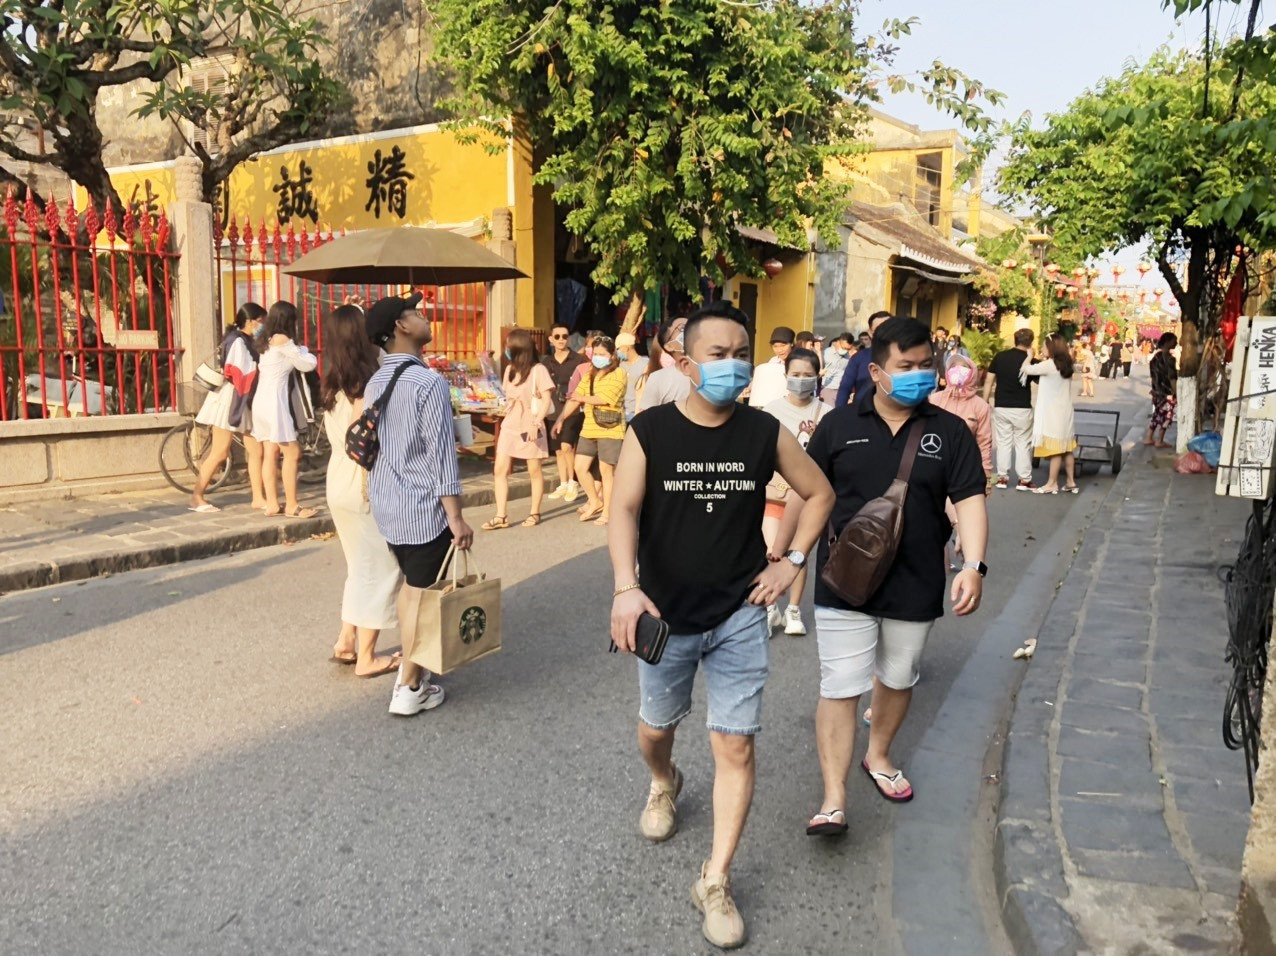 Visitors to Hoi An